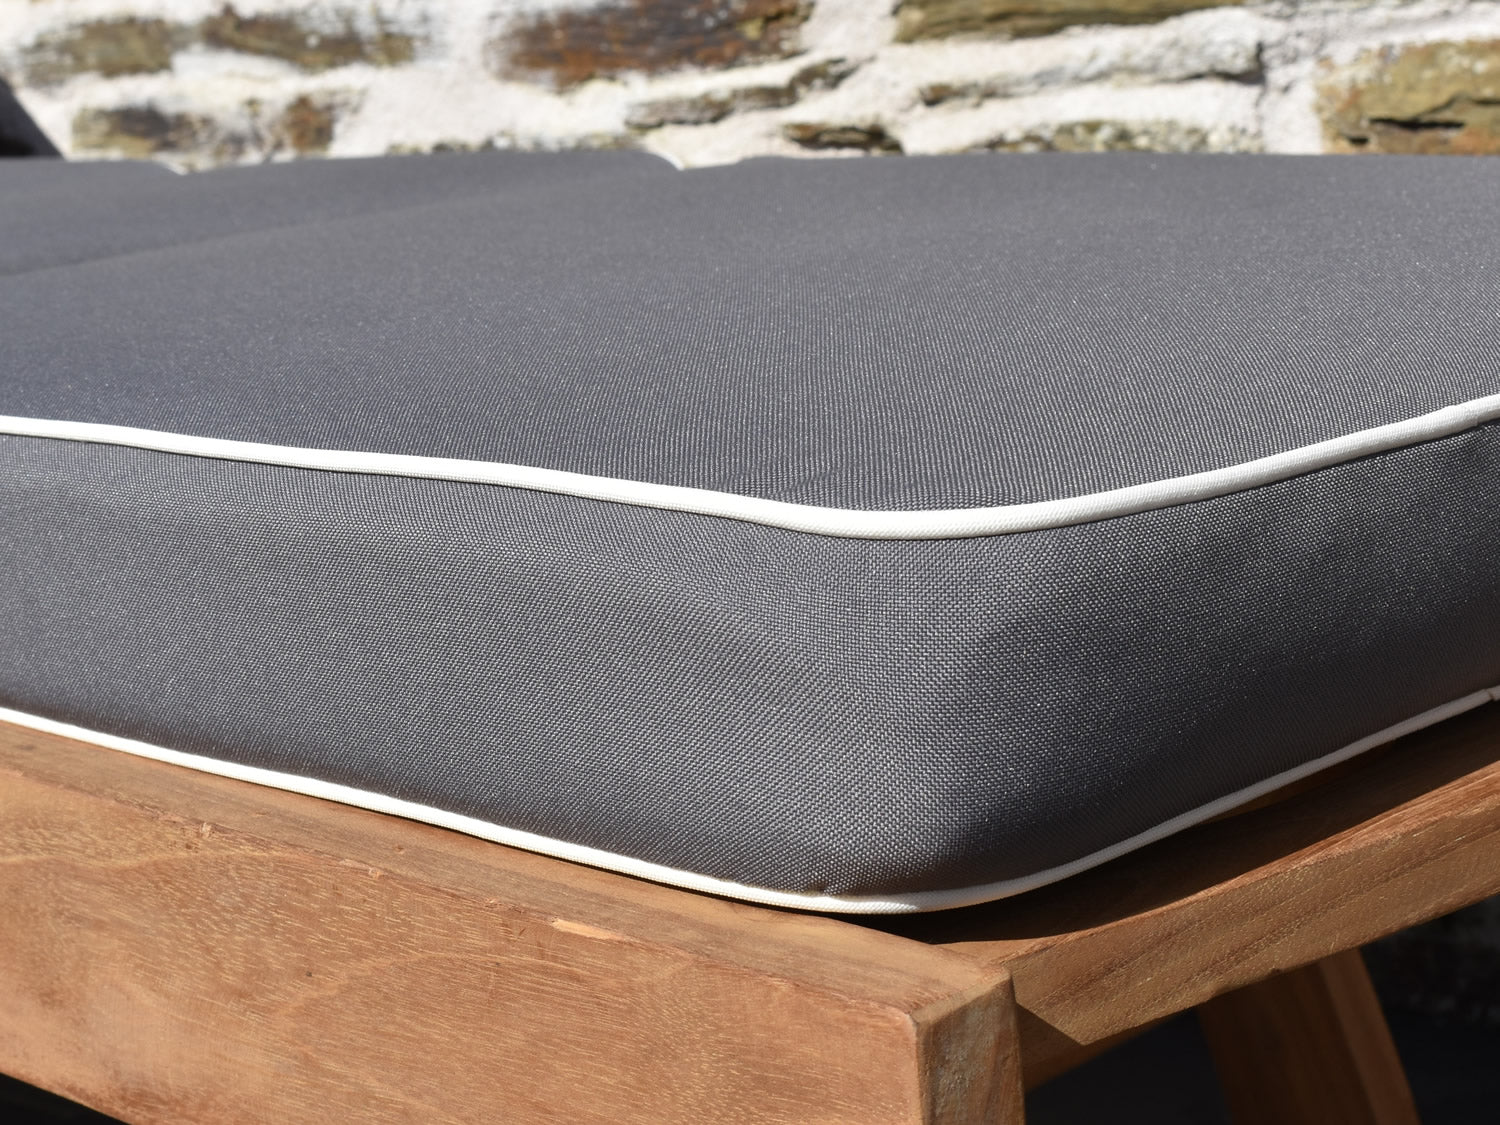 close up fabric detail of luxury dove grey sunlounger cushion with contrast white piping